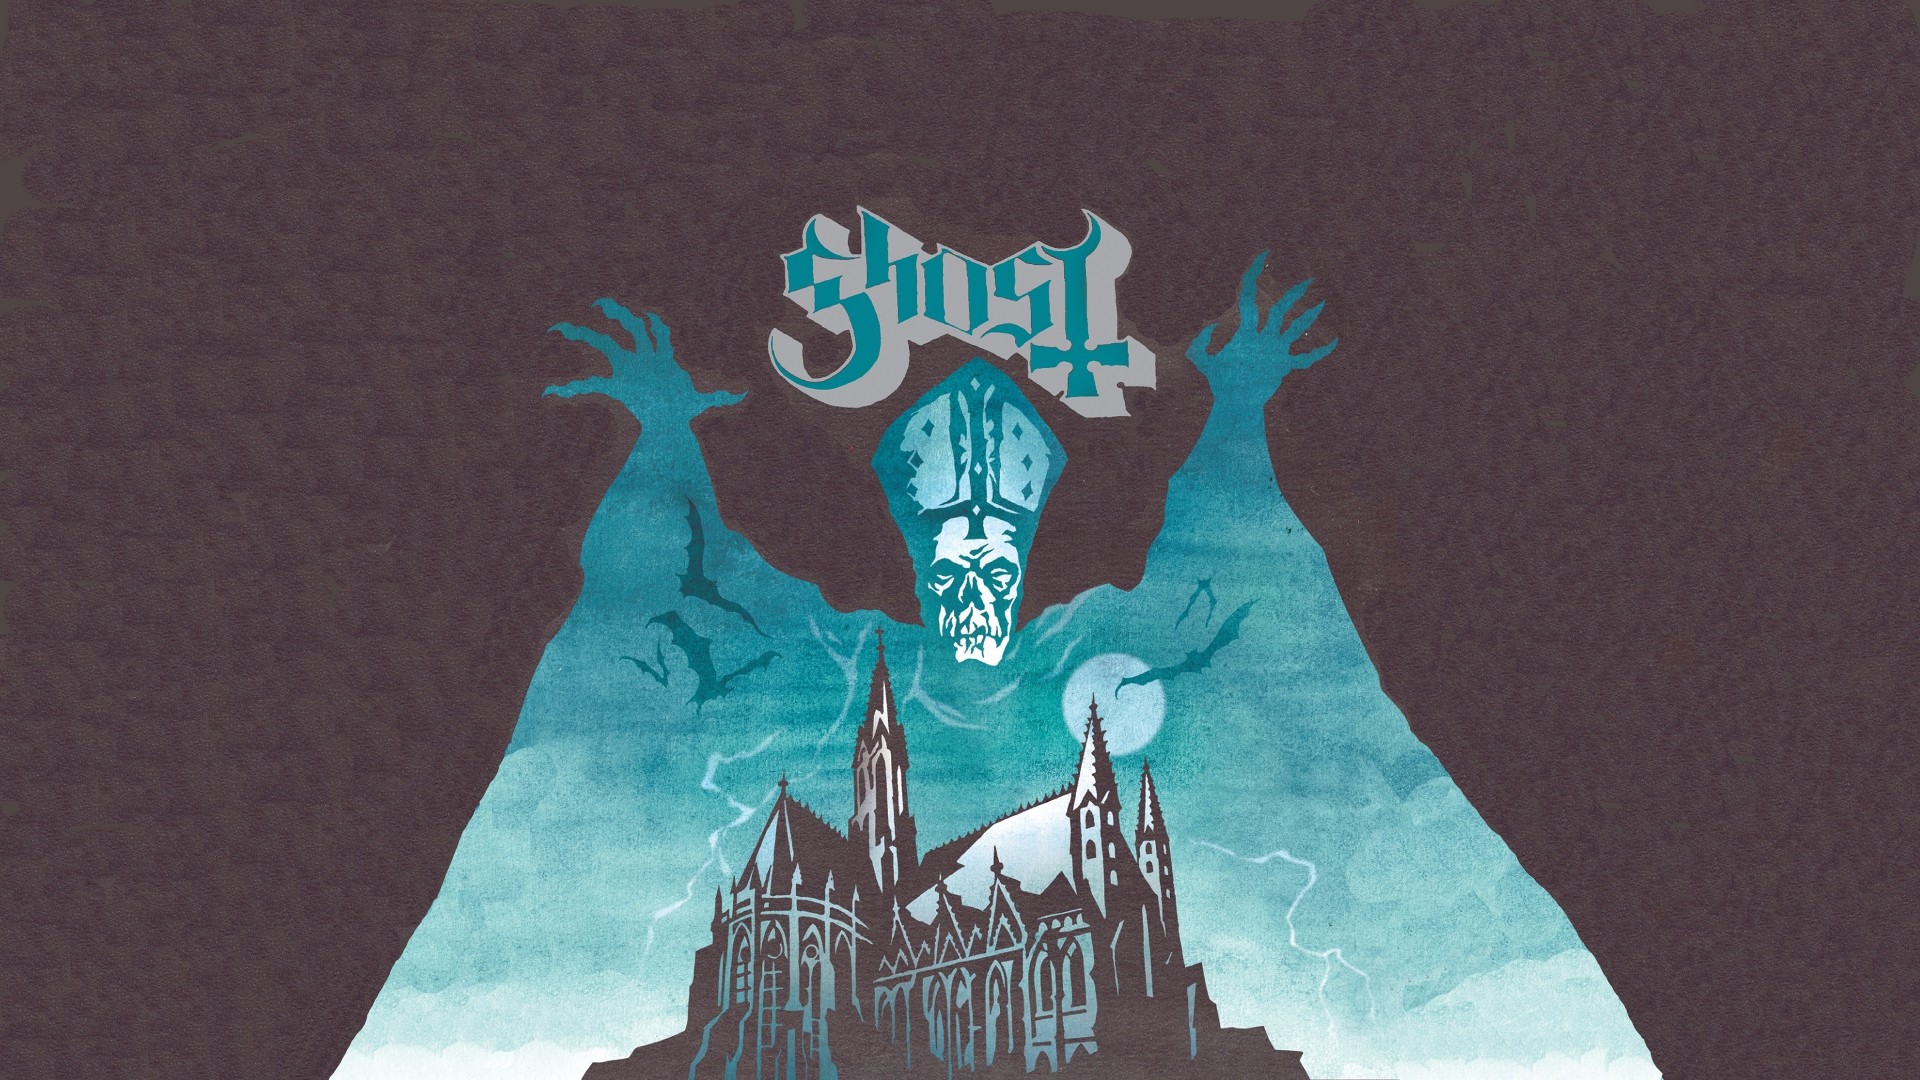 Ghost B C Band Metal Music Music Artwork Cover Art Rock Bands Psychedelic Rock Rock Music Blue Gray 1920x1080